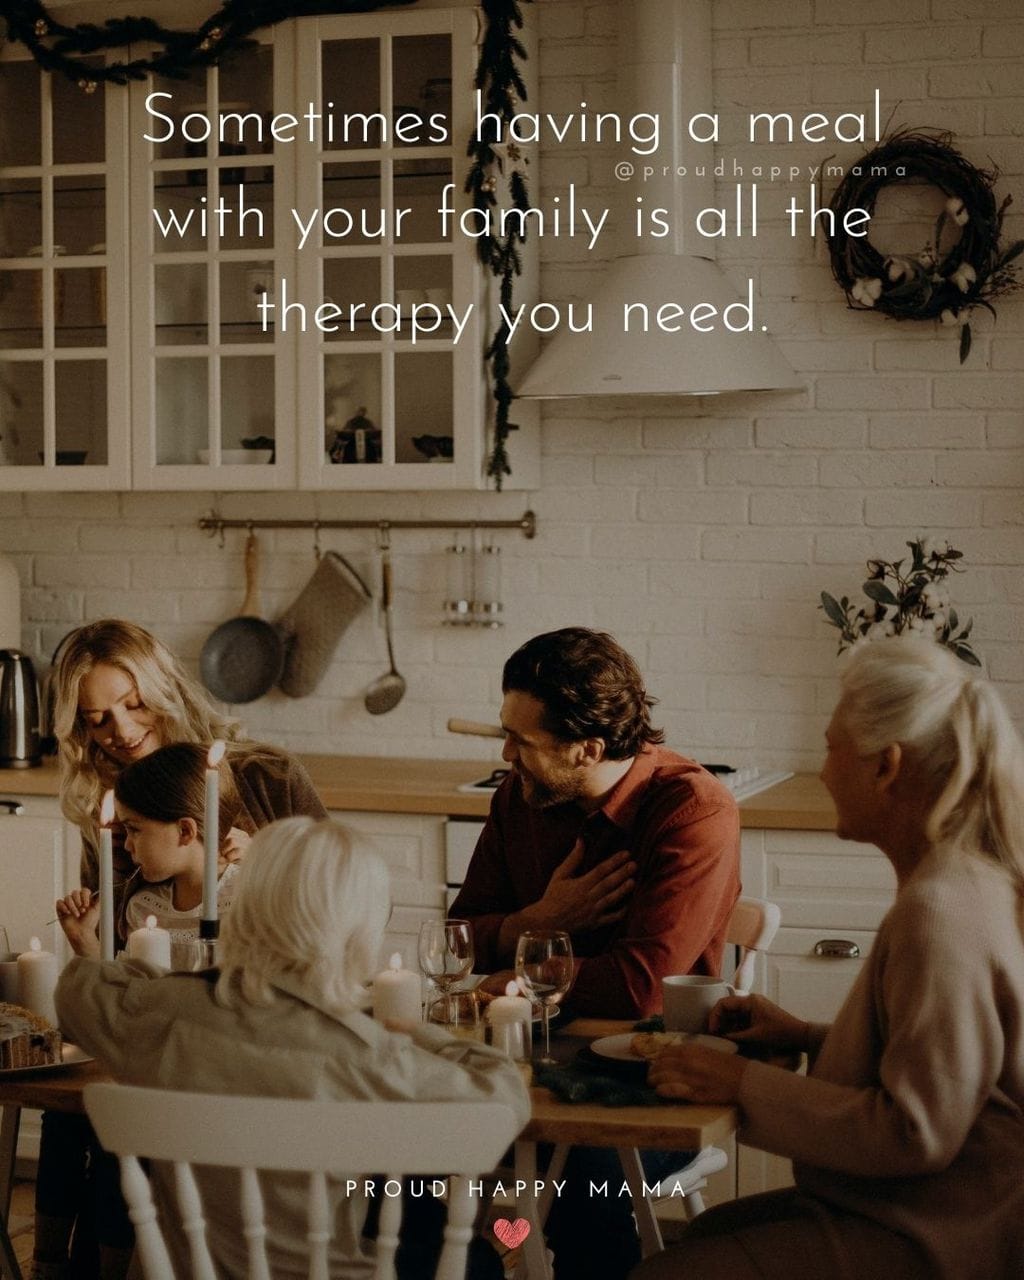 Friends Are Family Quotes | Sometimes having a meal with your family is all the therapy you need.